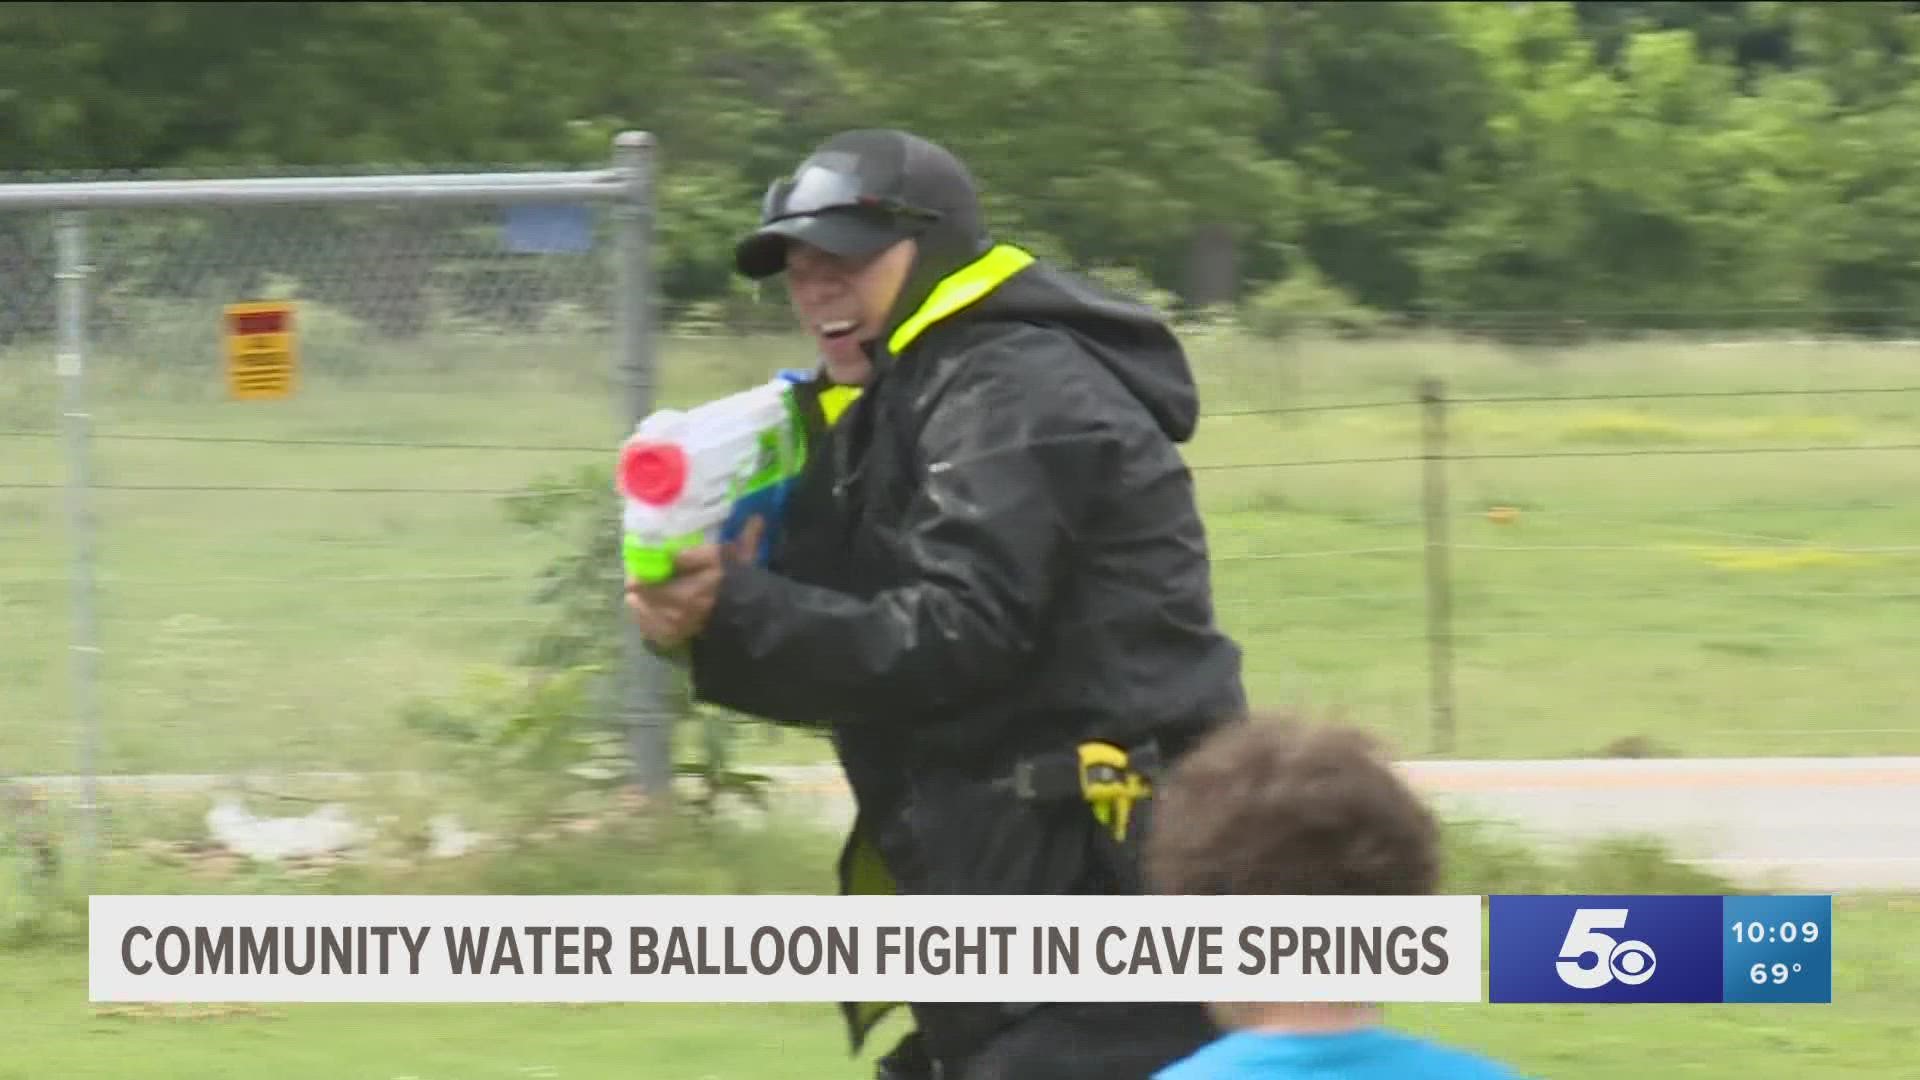 With the recent tragedy in Uvalde, Texas, officials said events like this water fight were crucial to connecting with the community.